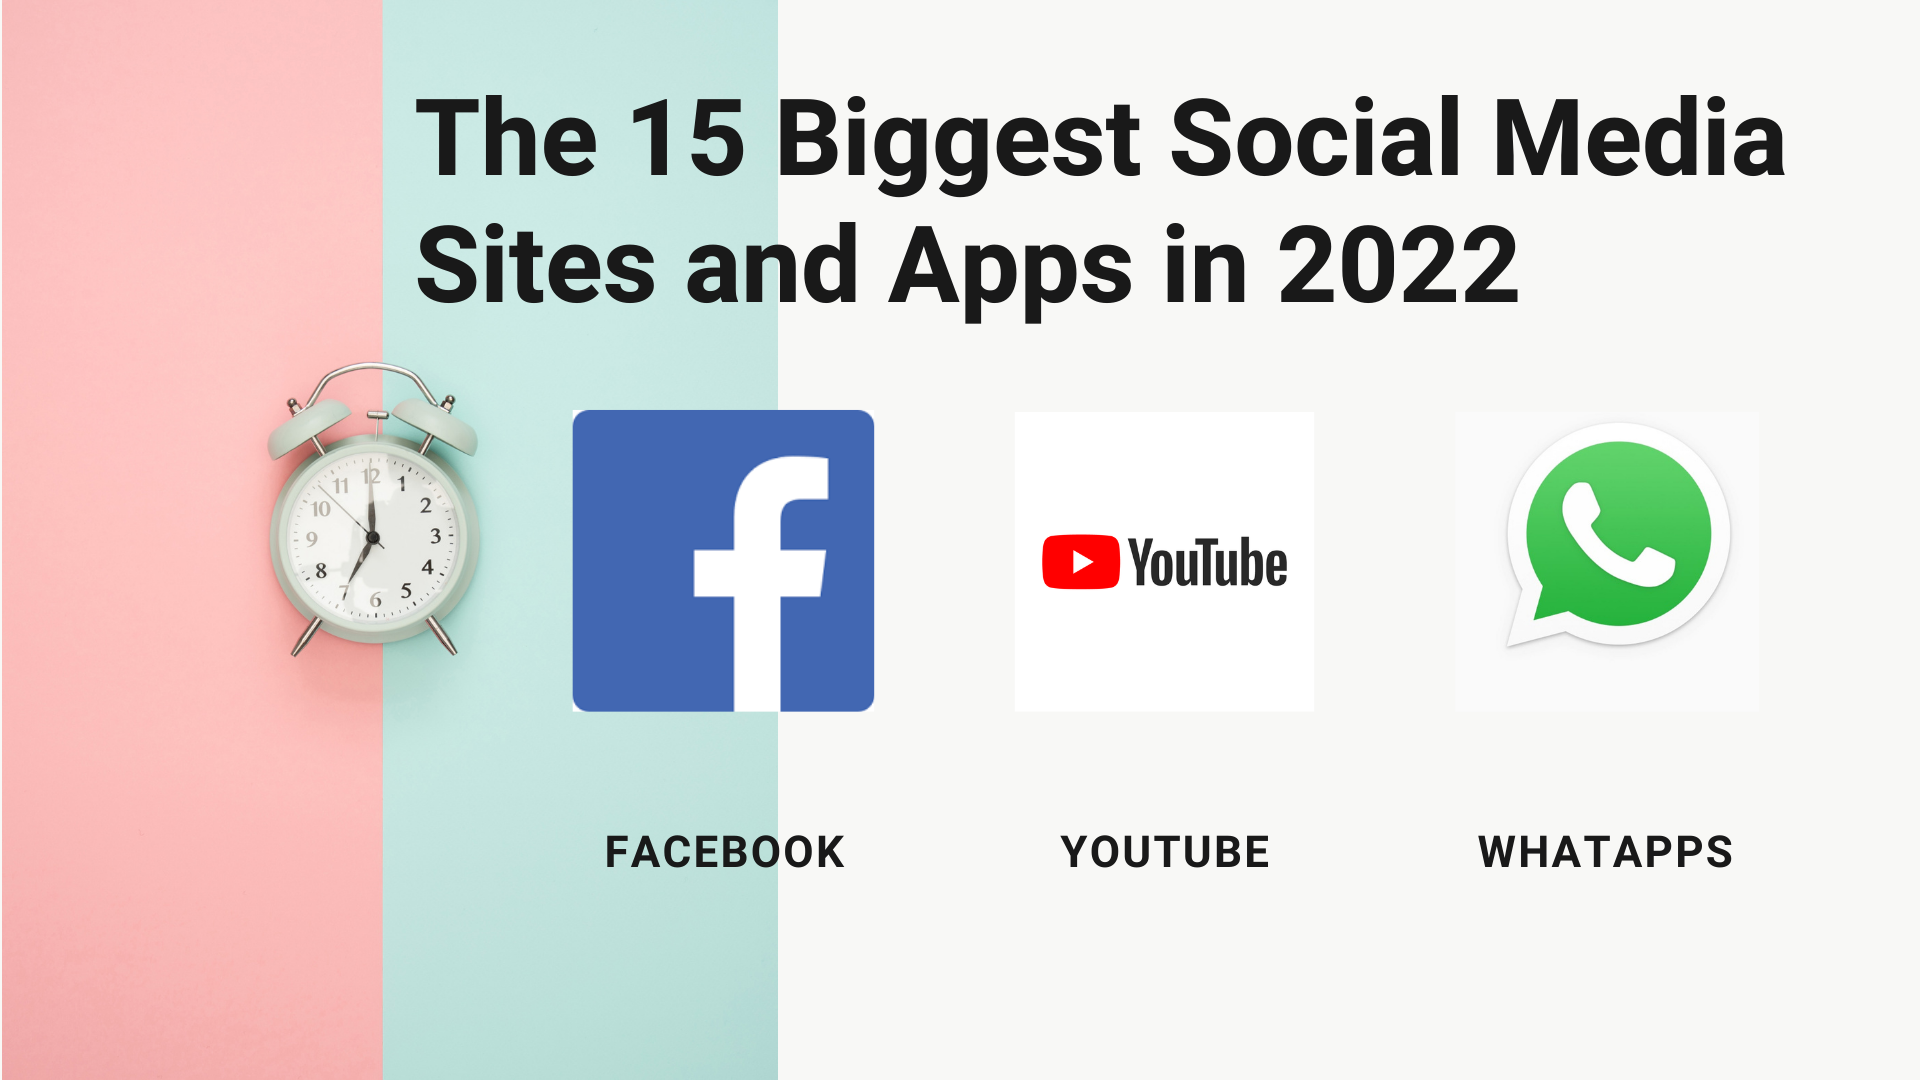 The 15 Biggest Social Media Sites and Apps in 2022